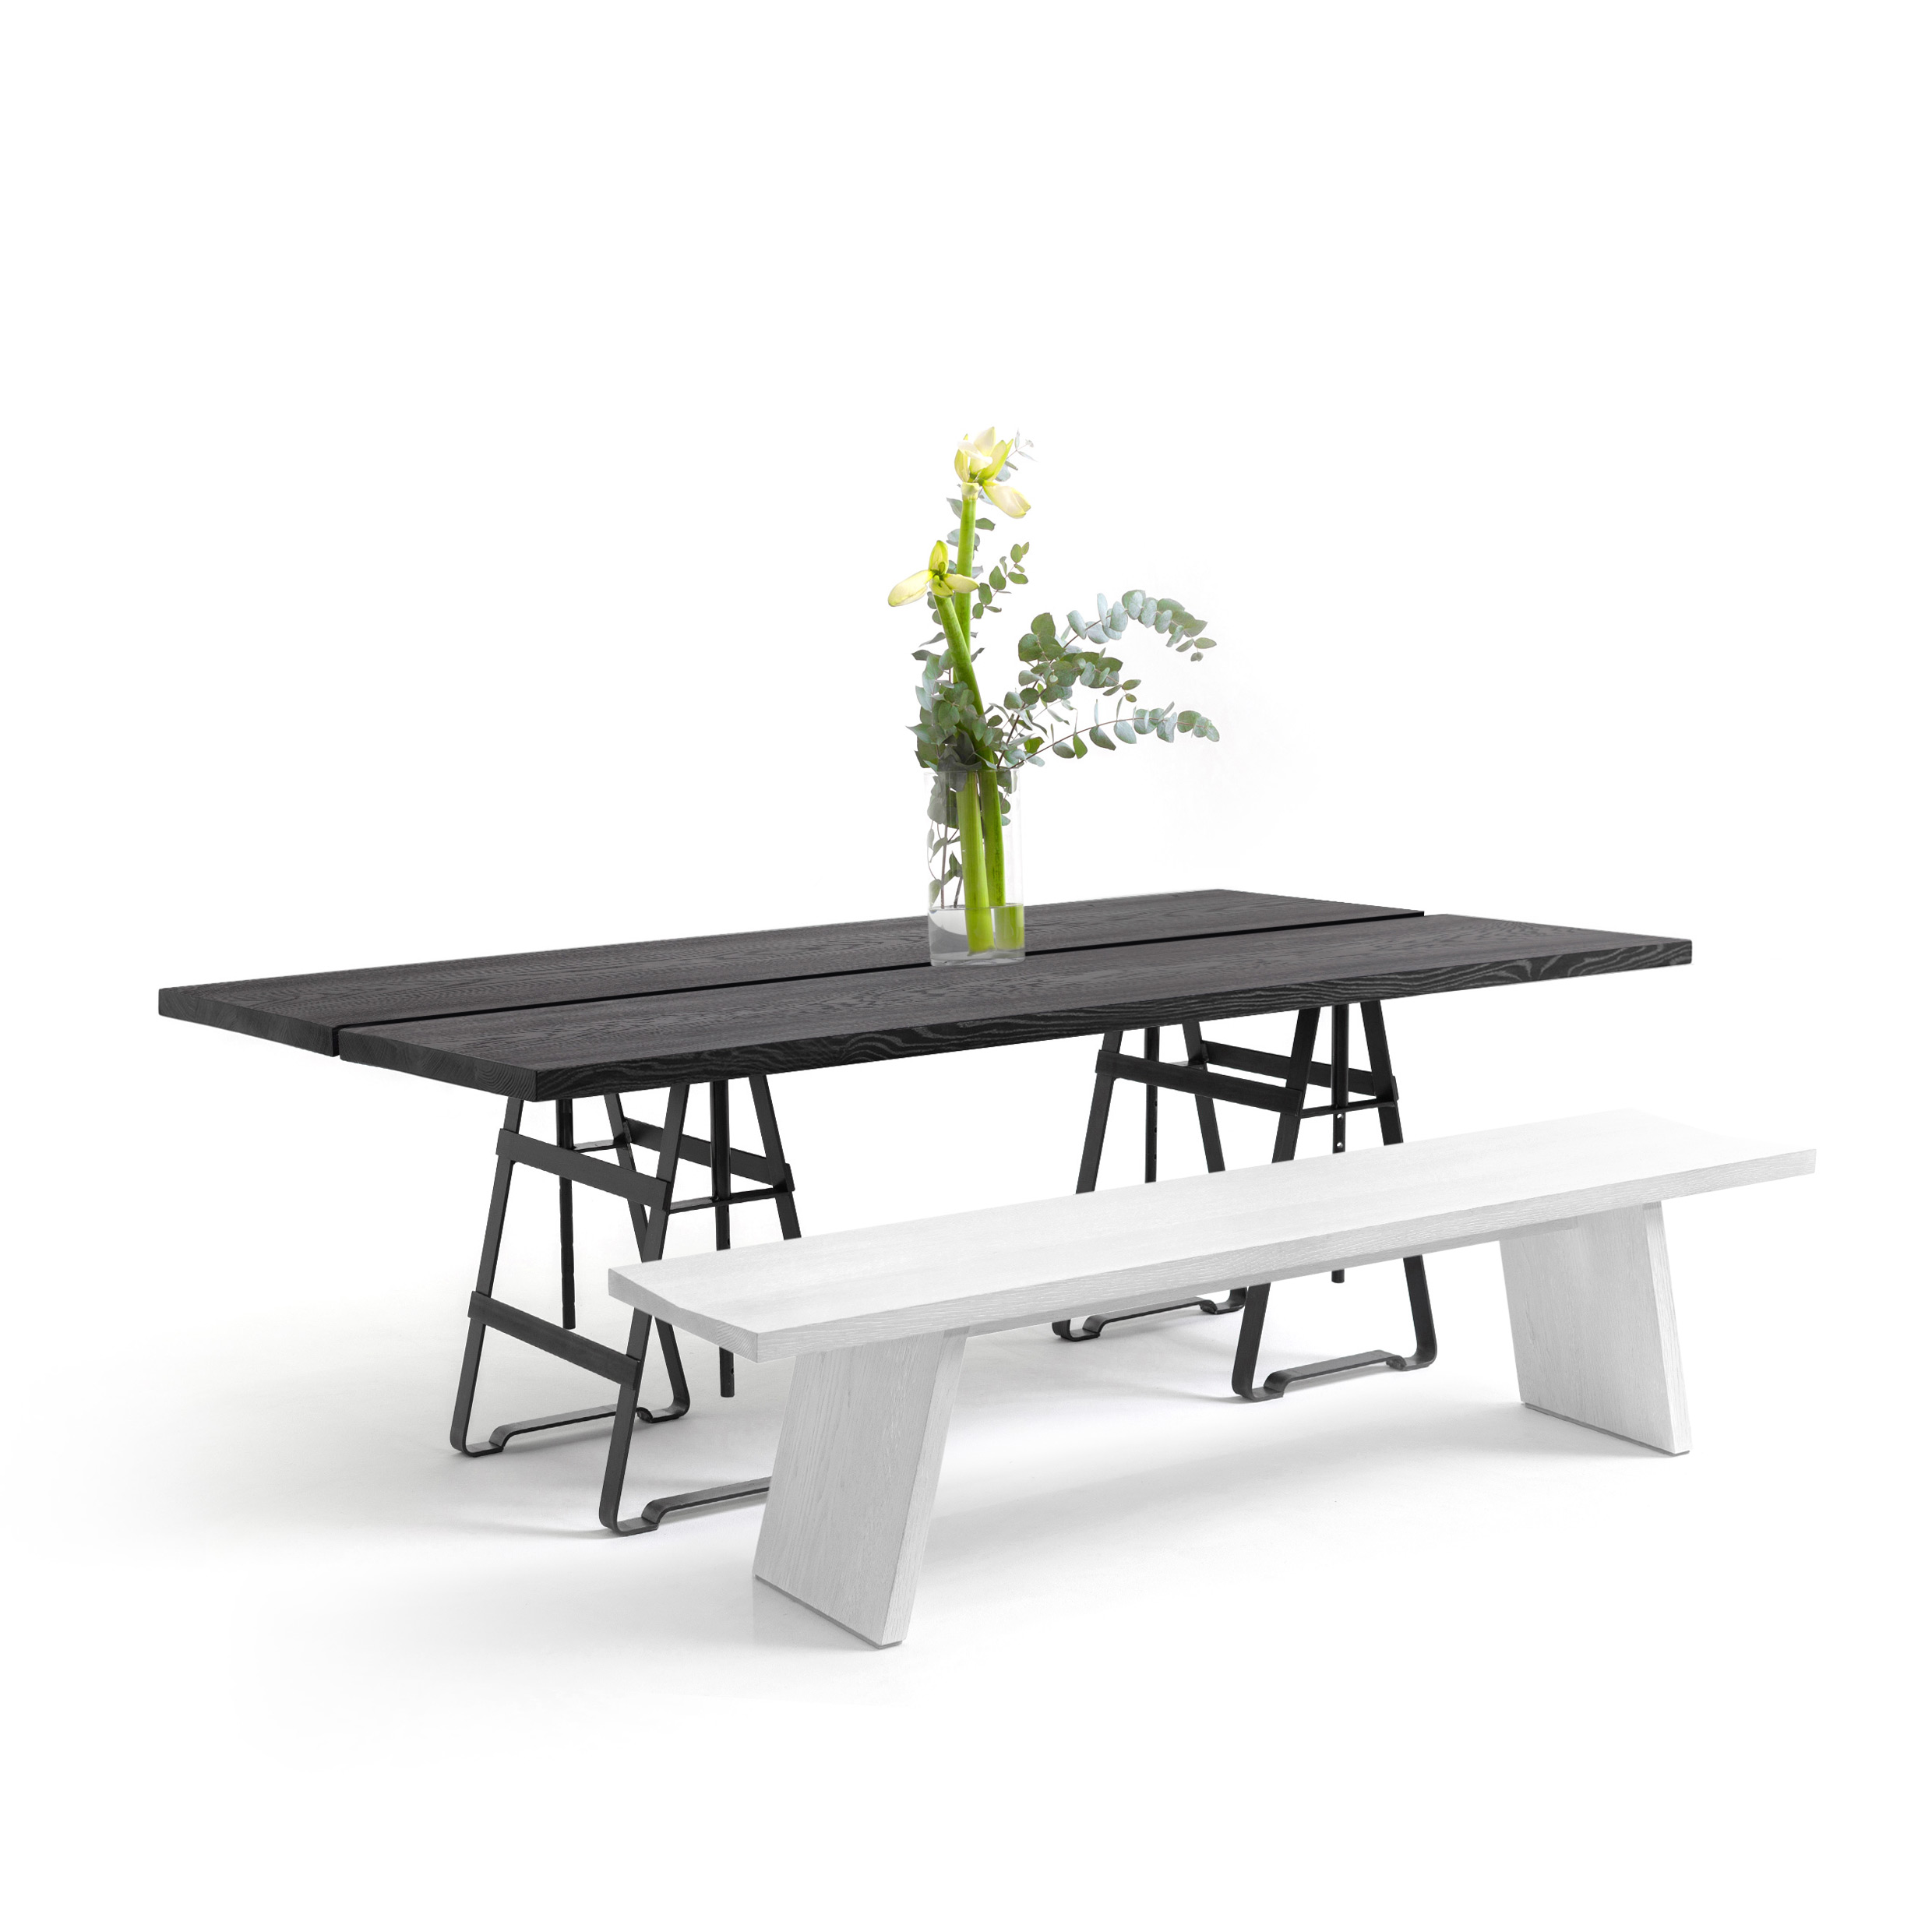 FORM EXCLUSIVE // JOON - IN-/OUTDOOR TABLE | BLACK CHARLED - 260CM X 45CM X 5CM - PAINT MONKEY BLACK